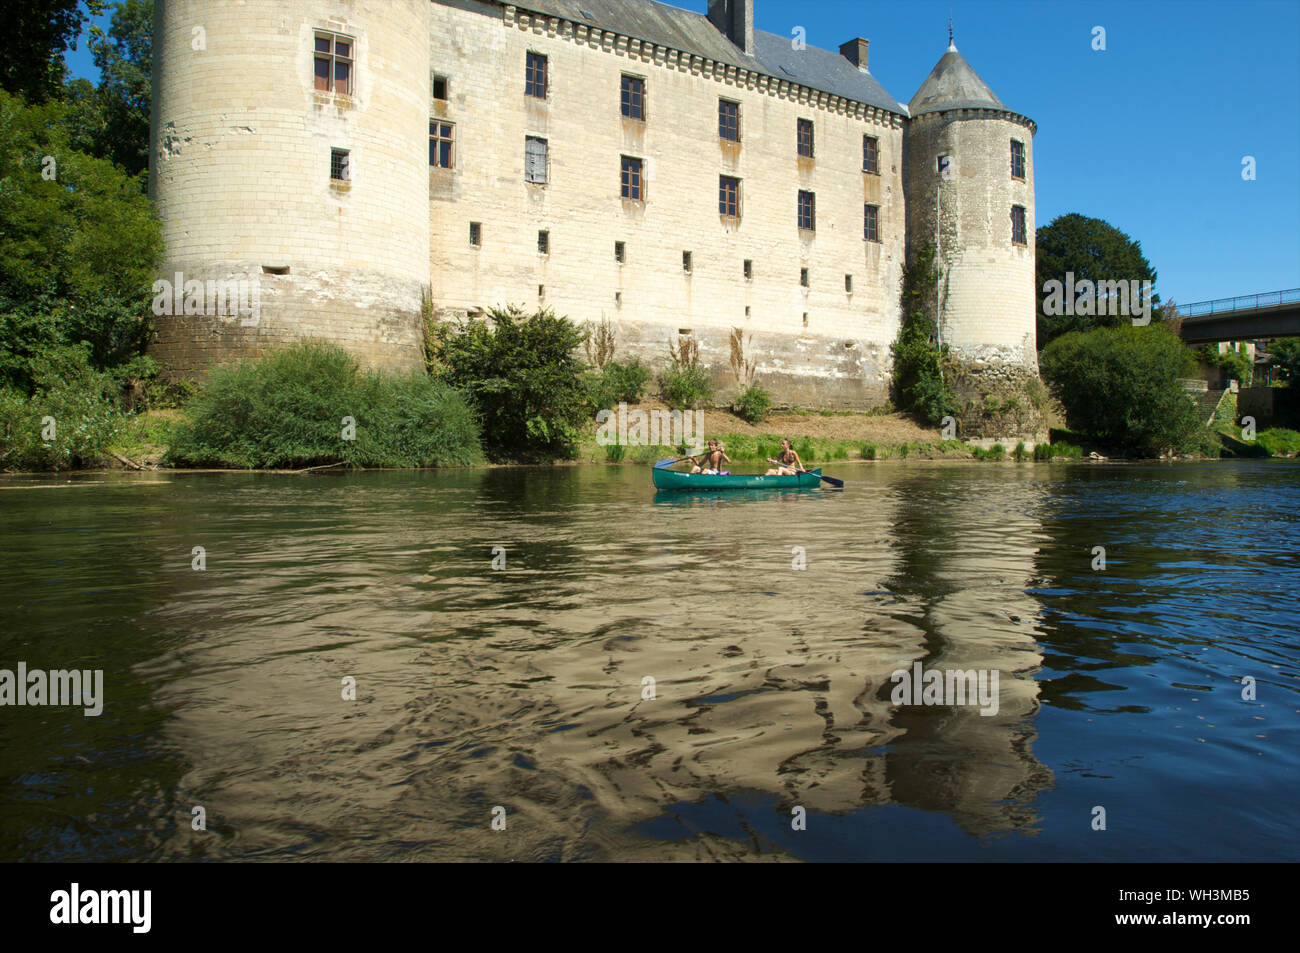 The Chateau de La Guerche with two children in a kayak on river La Creuse in Indre and Loire Valley, France Stock Photo